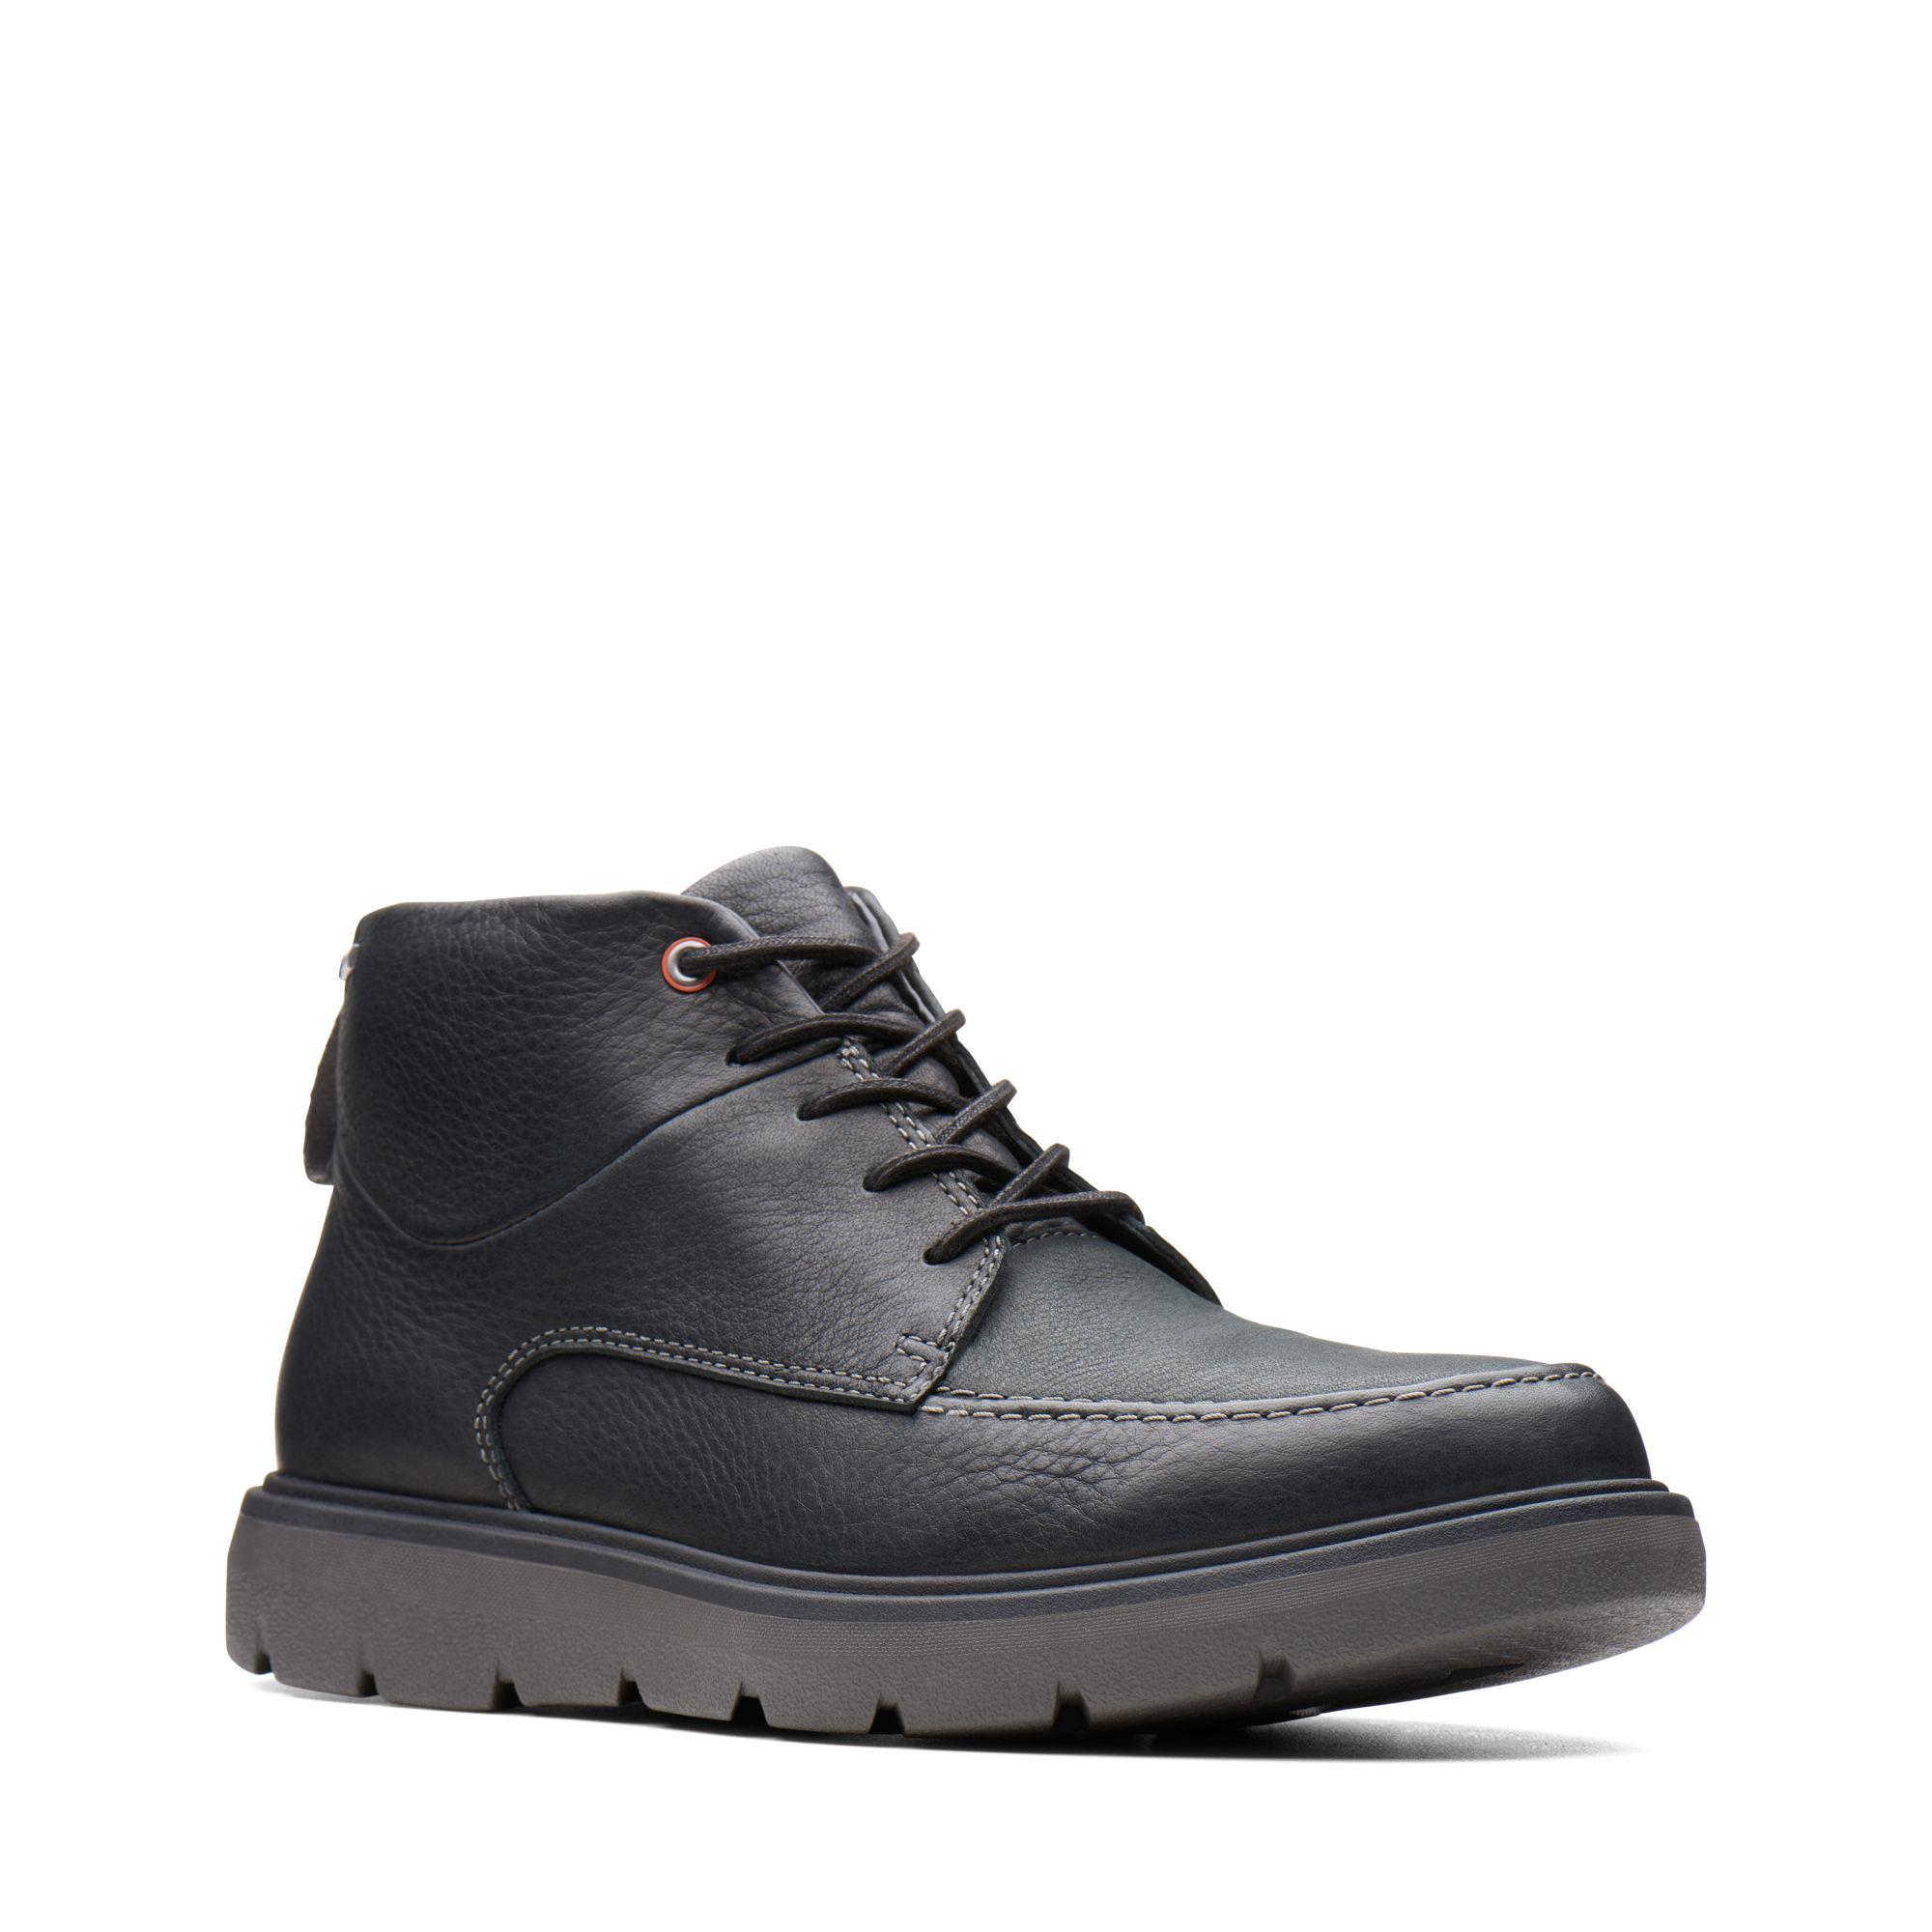 Clarks Leather Un Map Mid Gore-tex in Black Leather (Black) for Men - Lyst